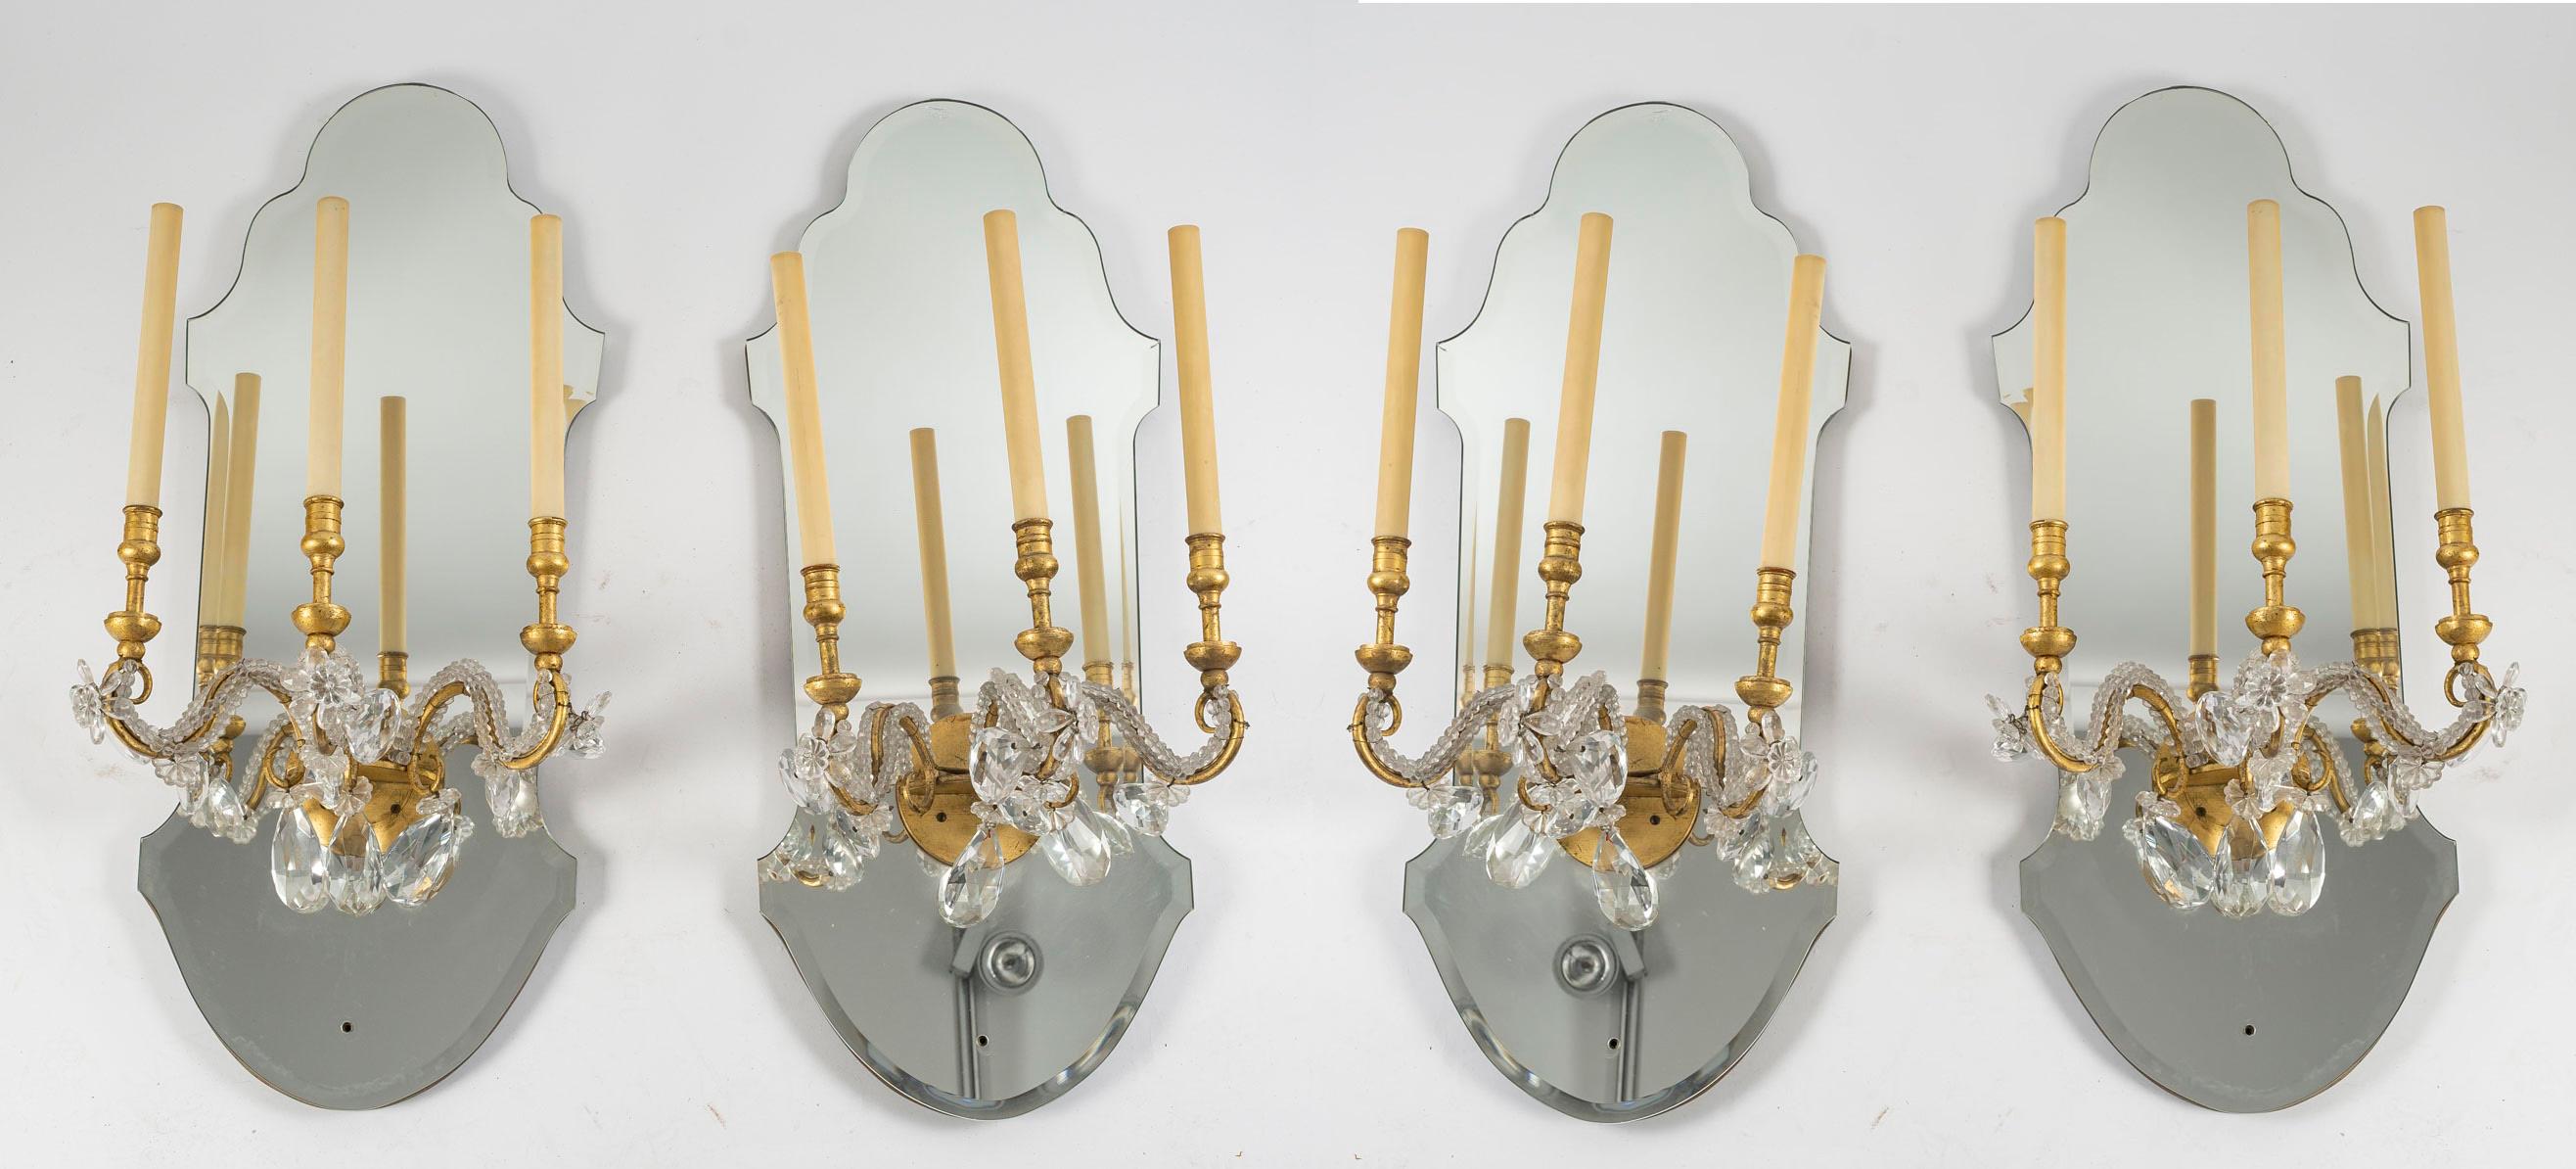 Suite of 6 gilded iron and mirror sconces with glass drops, 1950-1960.

Suite of 6 Delisle sconces, 1950-1960, in mirror and gilded iron with glass drops.  
h: 85cm, w: 33cm, d: 30cm